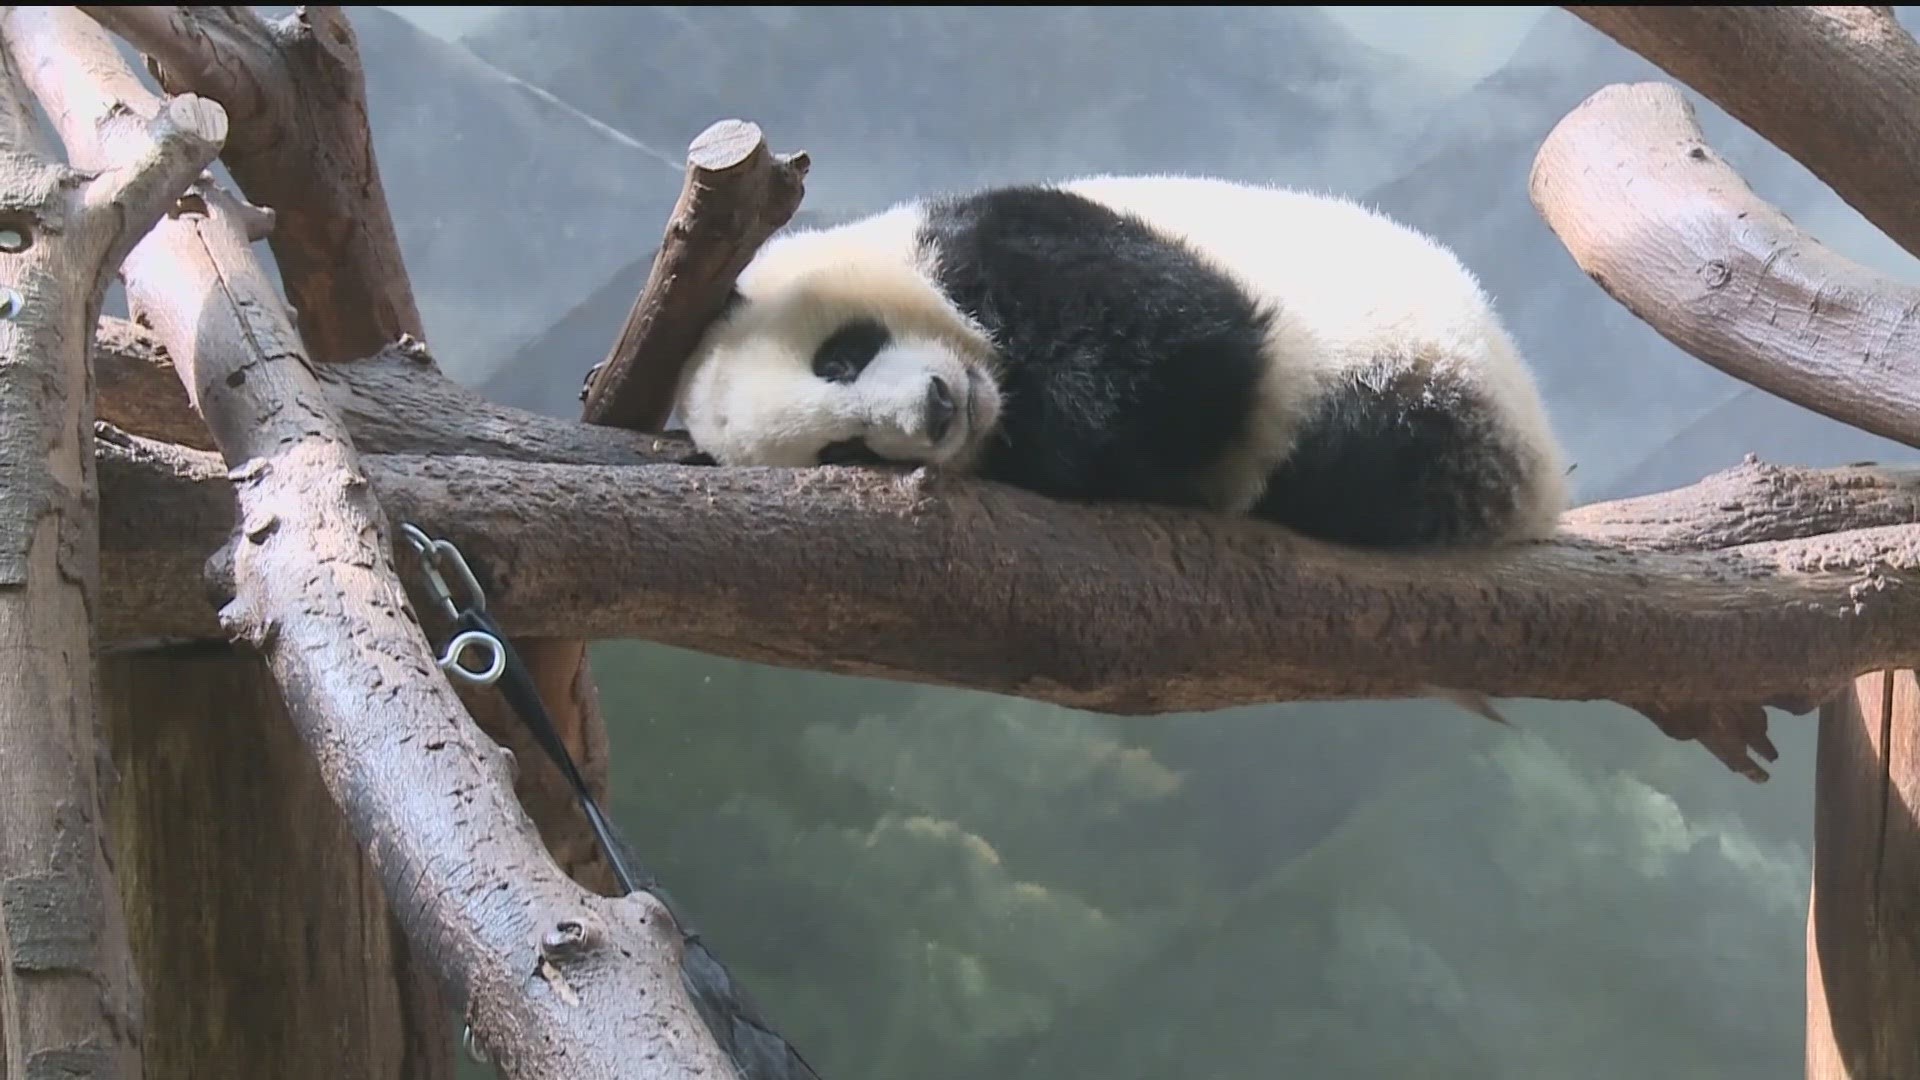 The iconic giant pandas at Zoo Atlanta face an uncertain future as their loan agreement with China nears its end.